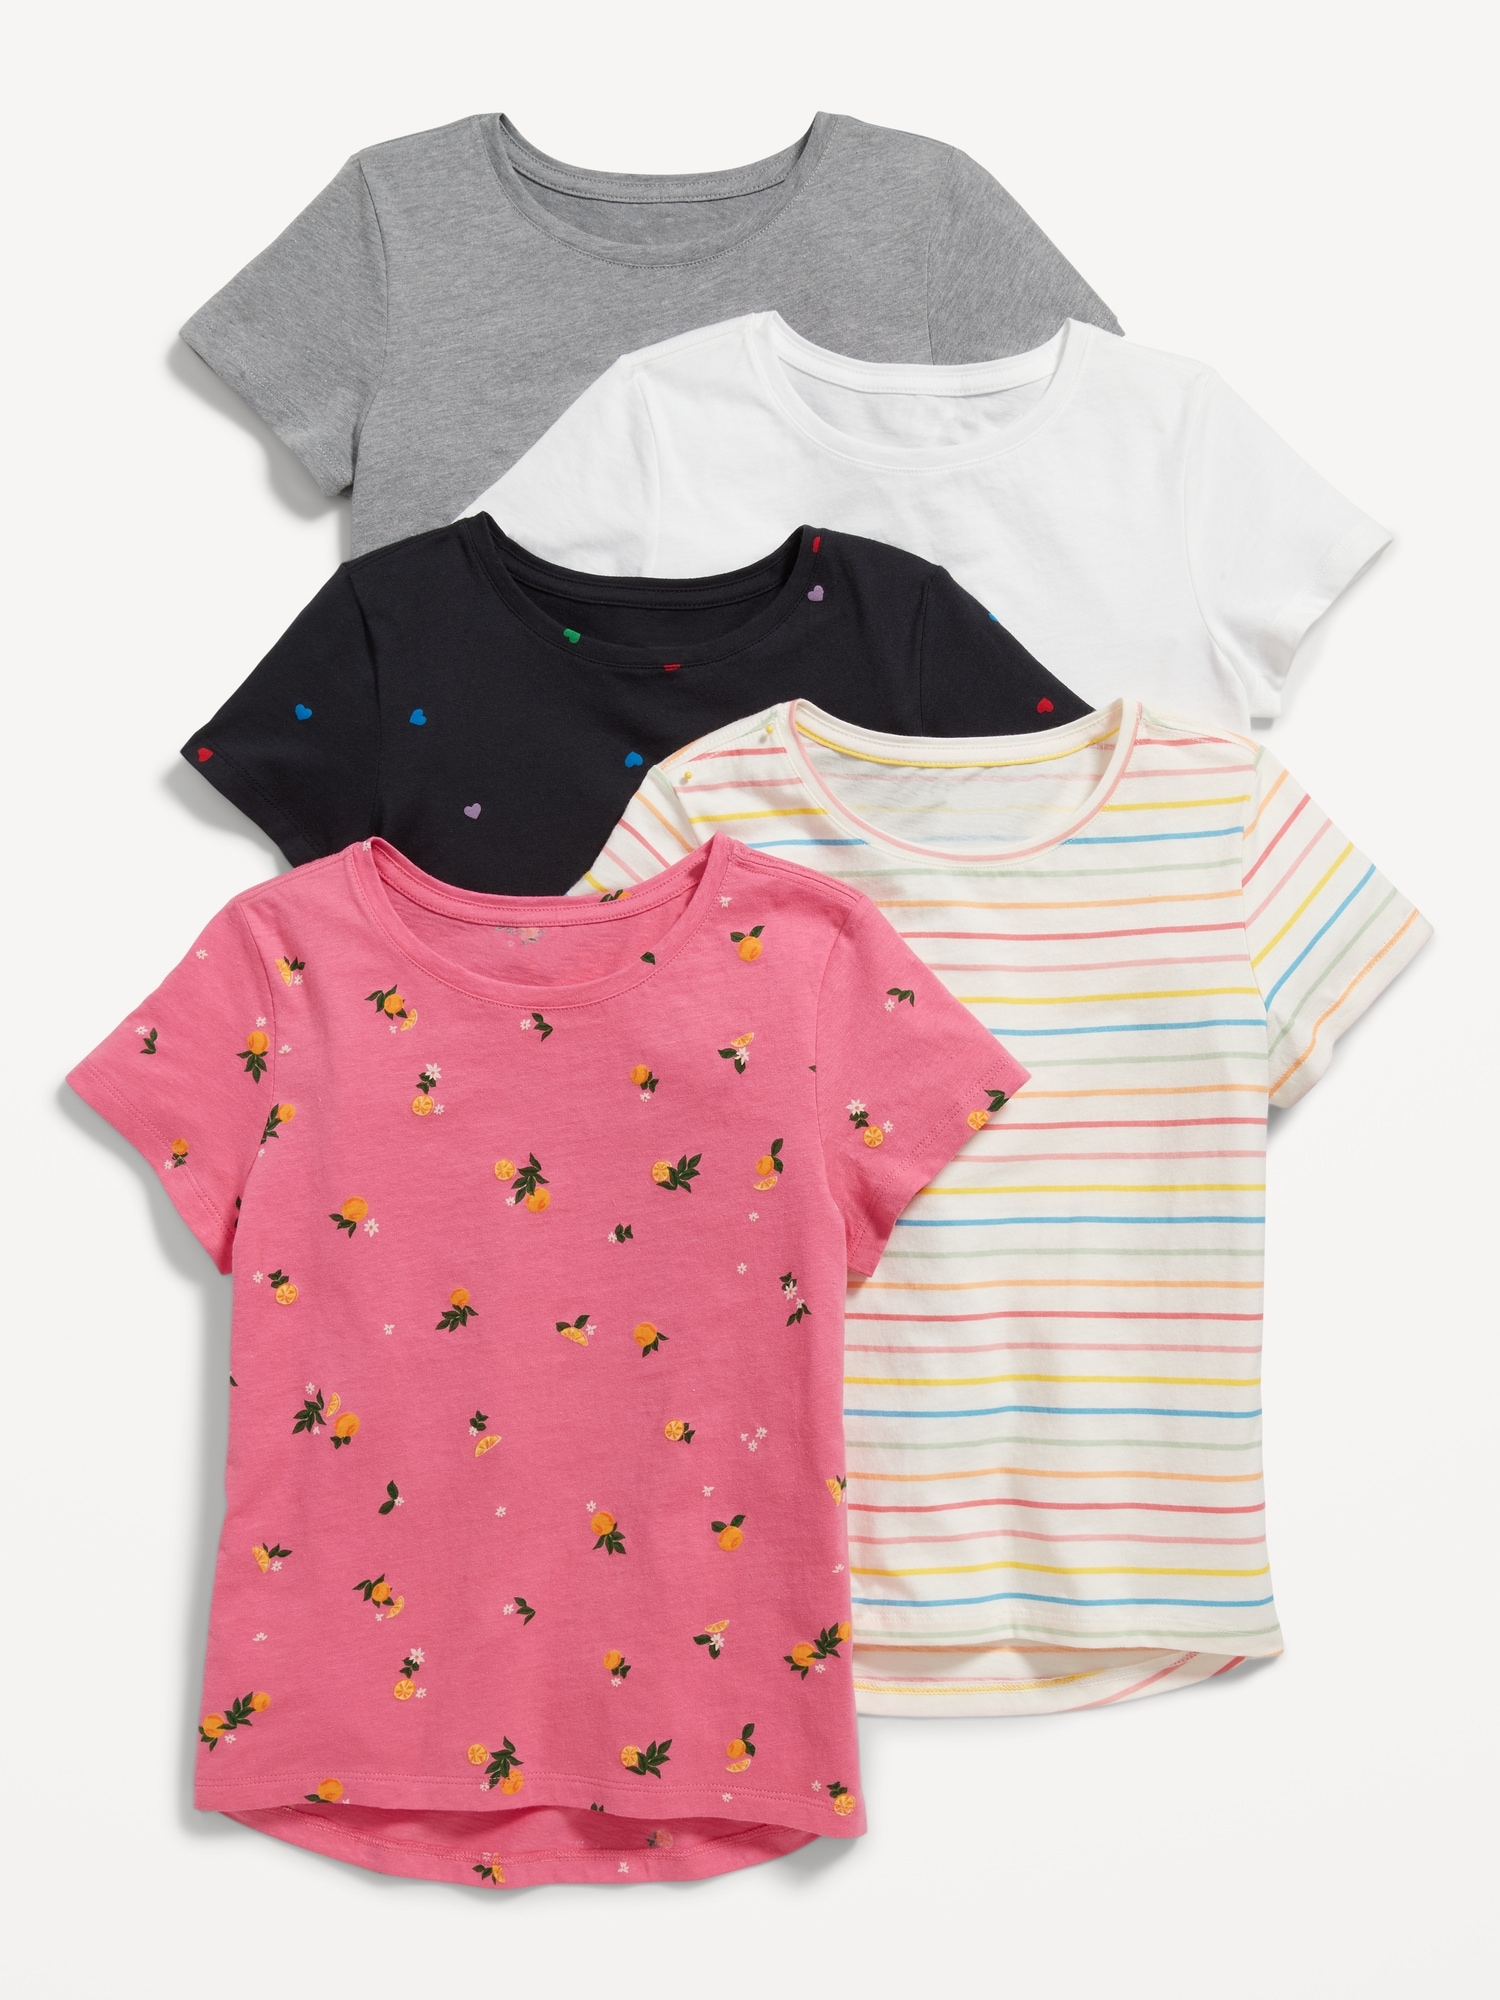 Old Navy Softest Printed T-Shirt 5-Pack for Girls multi. 1